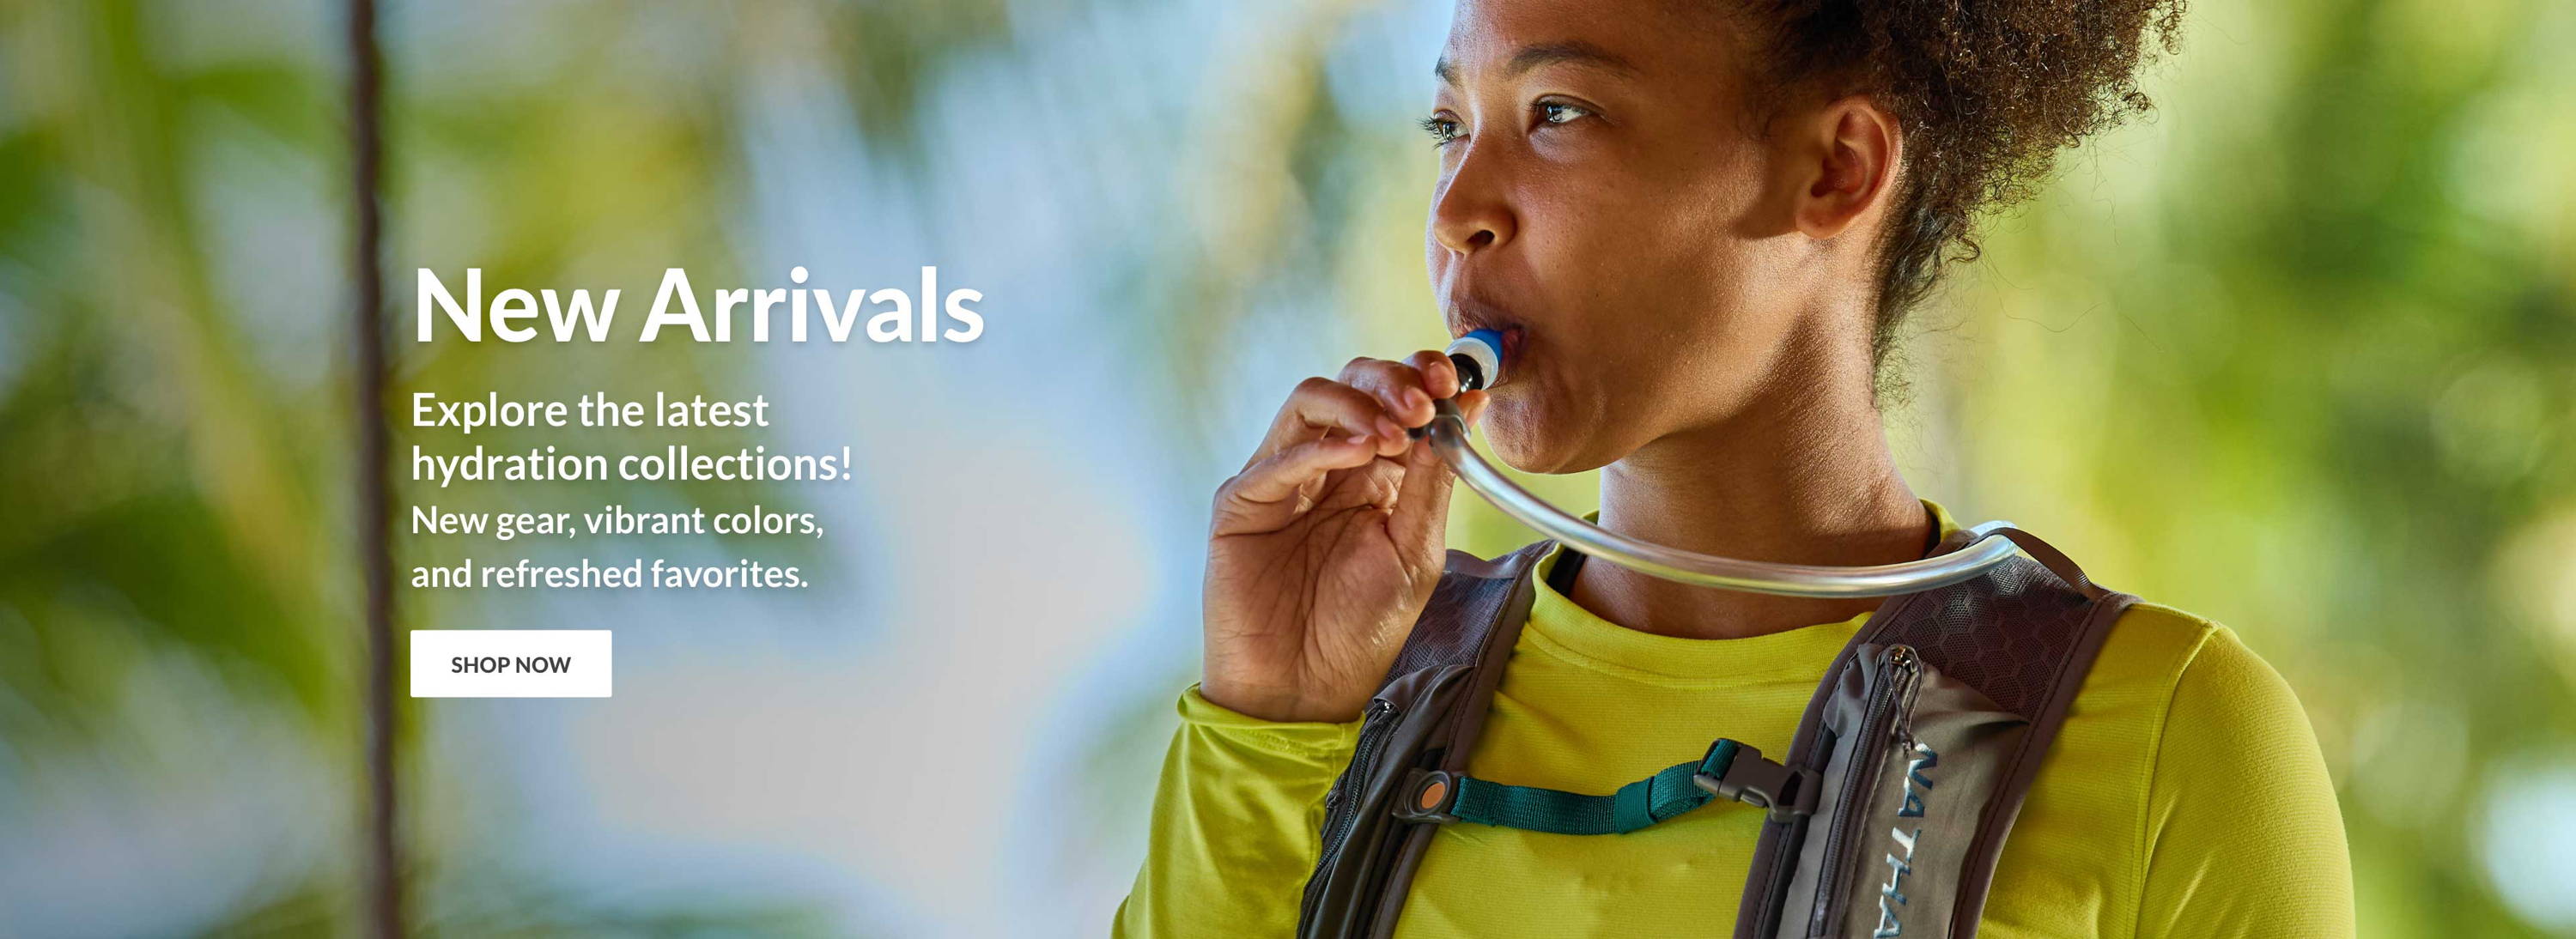 New Arrivals - Explore the Latest Hydration Collections! New Gear, Vibrant Colors, and Refreshed Favorites. - SHOP NOW